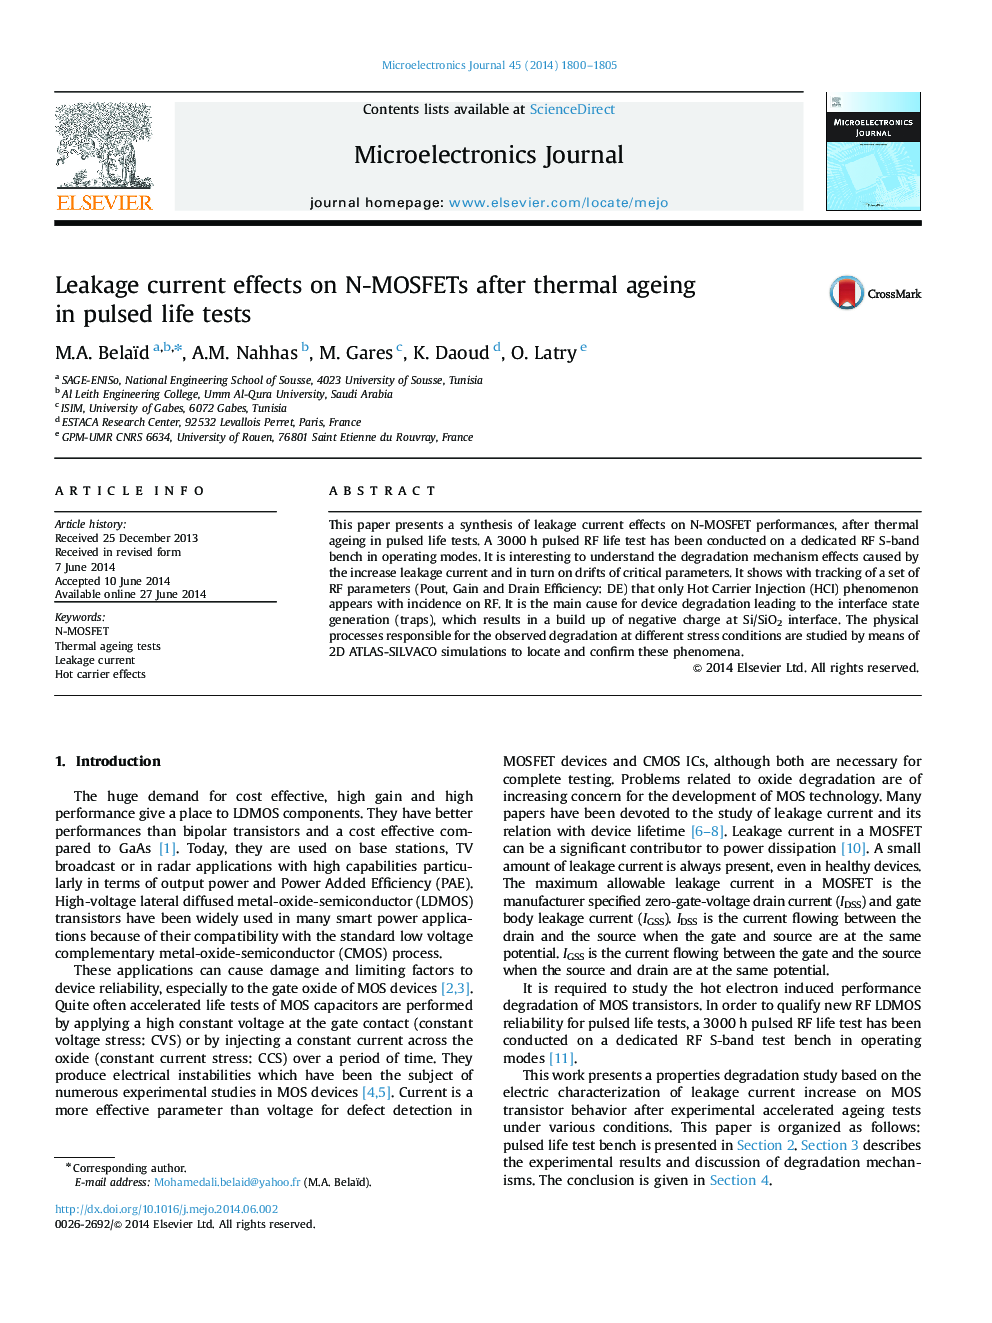 Leakage current effects on N-MOSFETs after thermal ageing in pulsed life tests